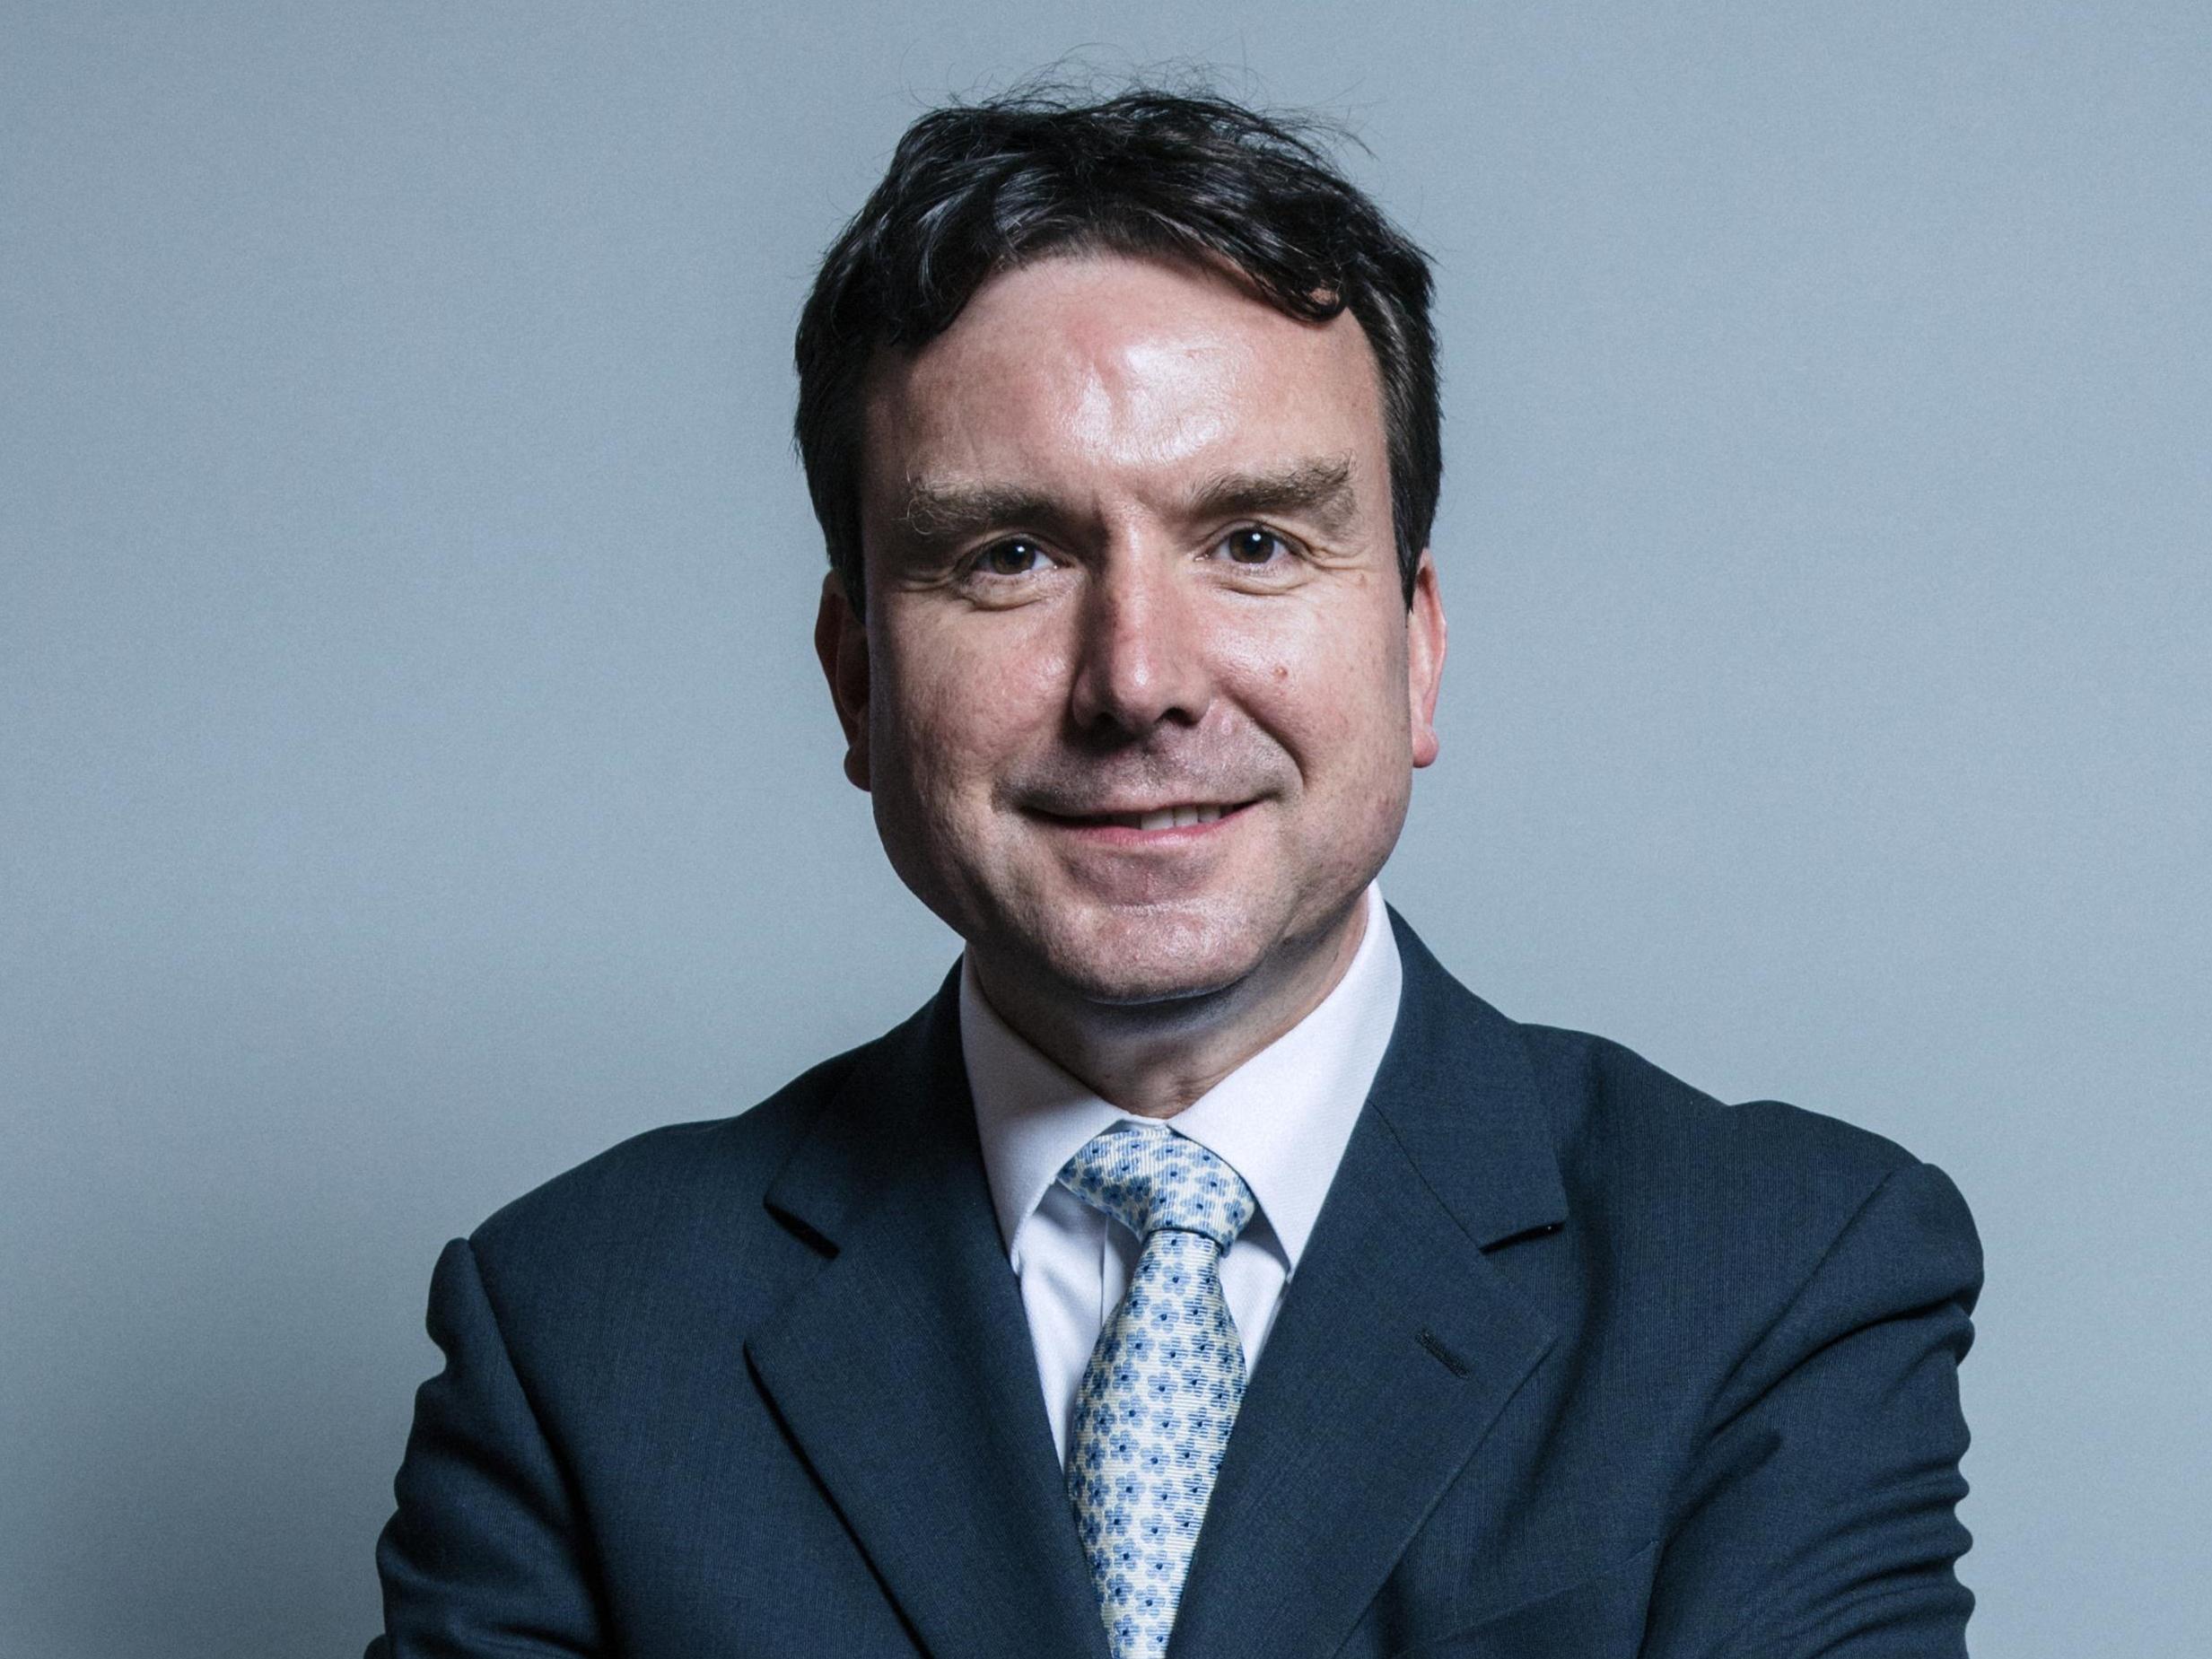 Former small business minister Andrew Griffiths